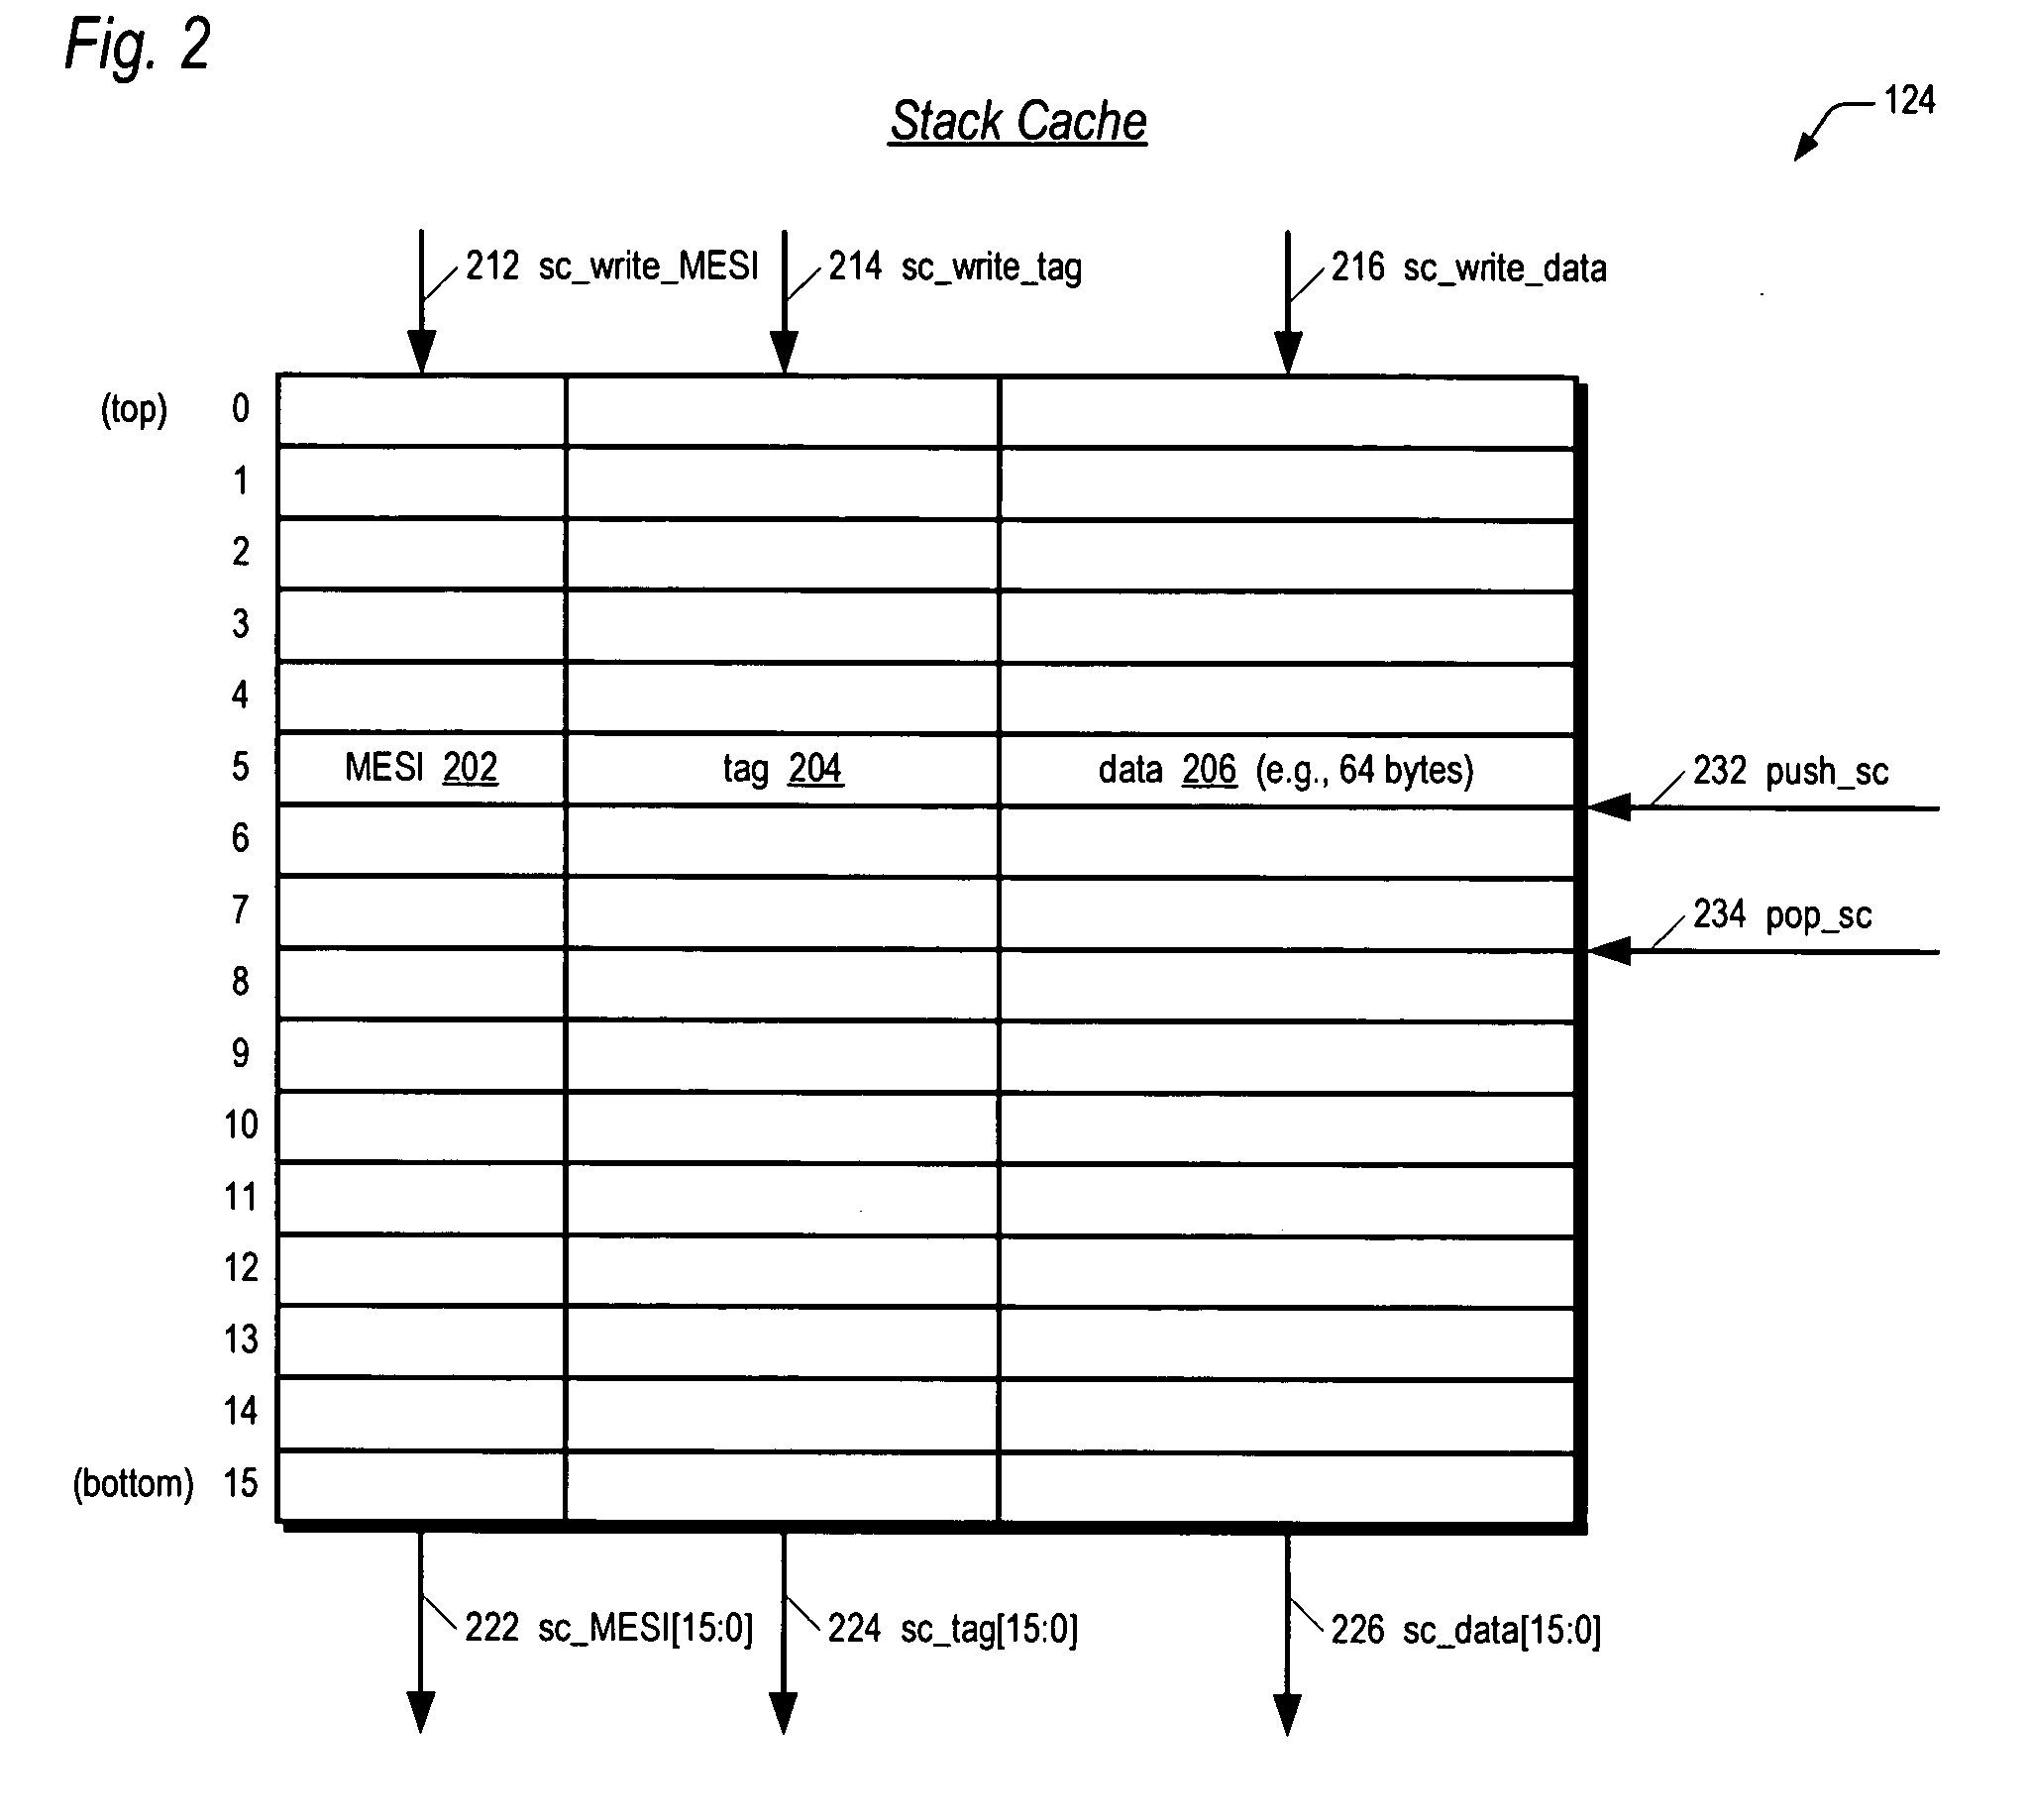 Microprocessor and apparatus for performing speculative load operation from a stack memory cache